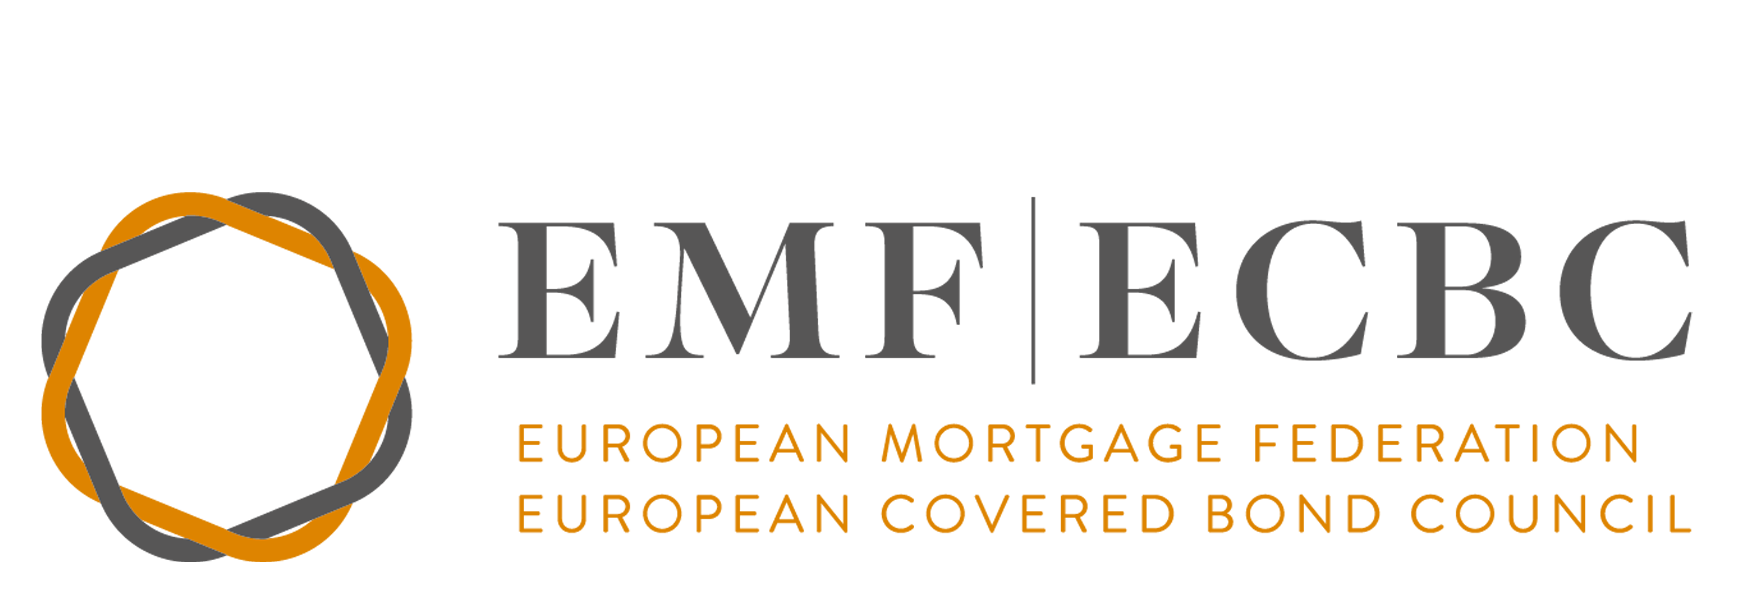 European Mortgage Foundation and European Covered Bond Council